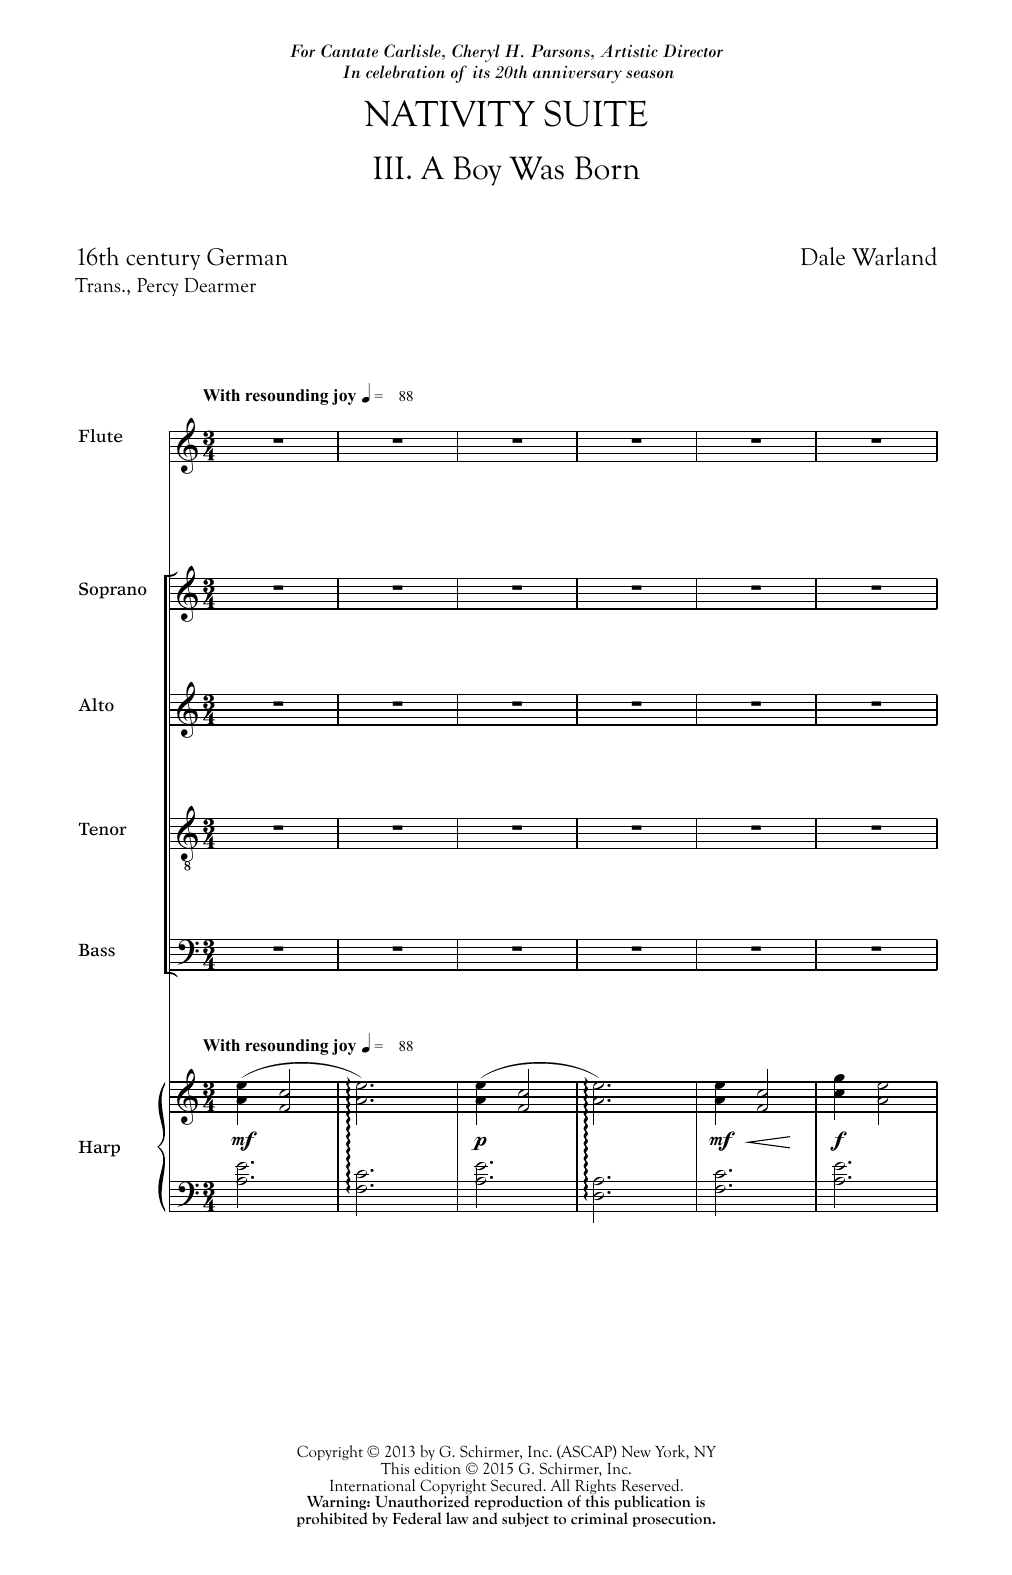 Download Dale Warland A Boy Was Born Sheet Music